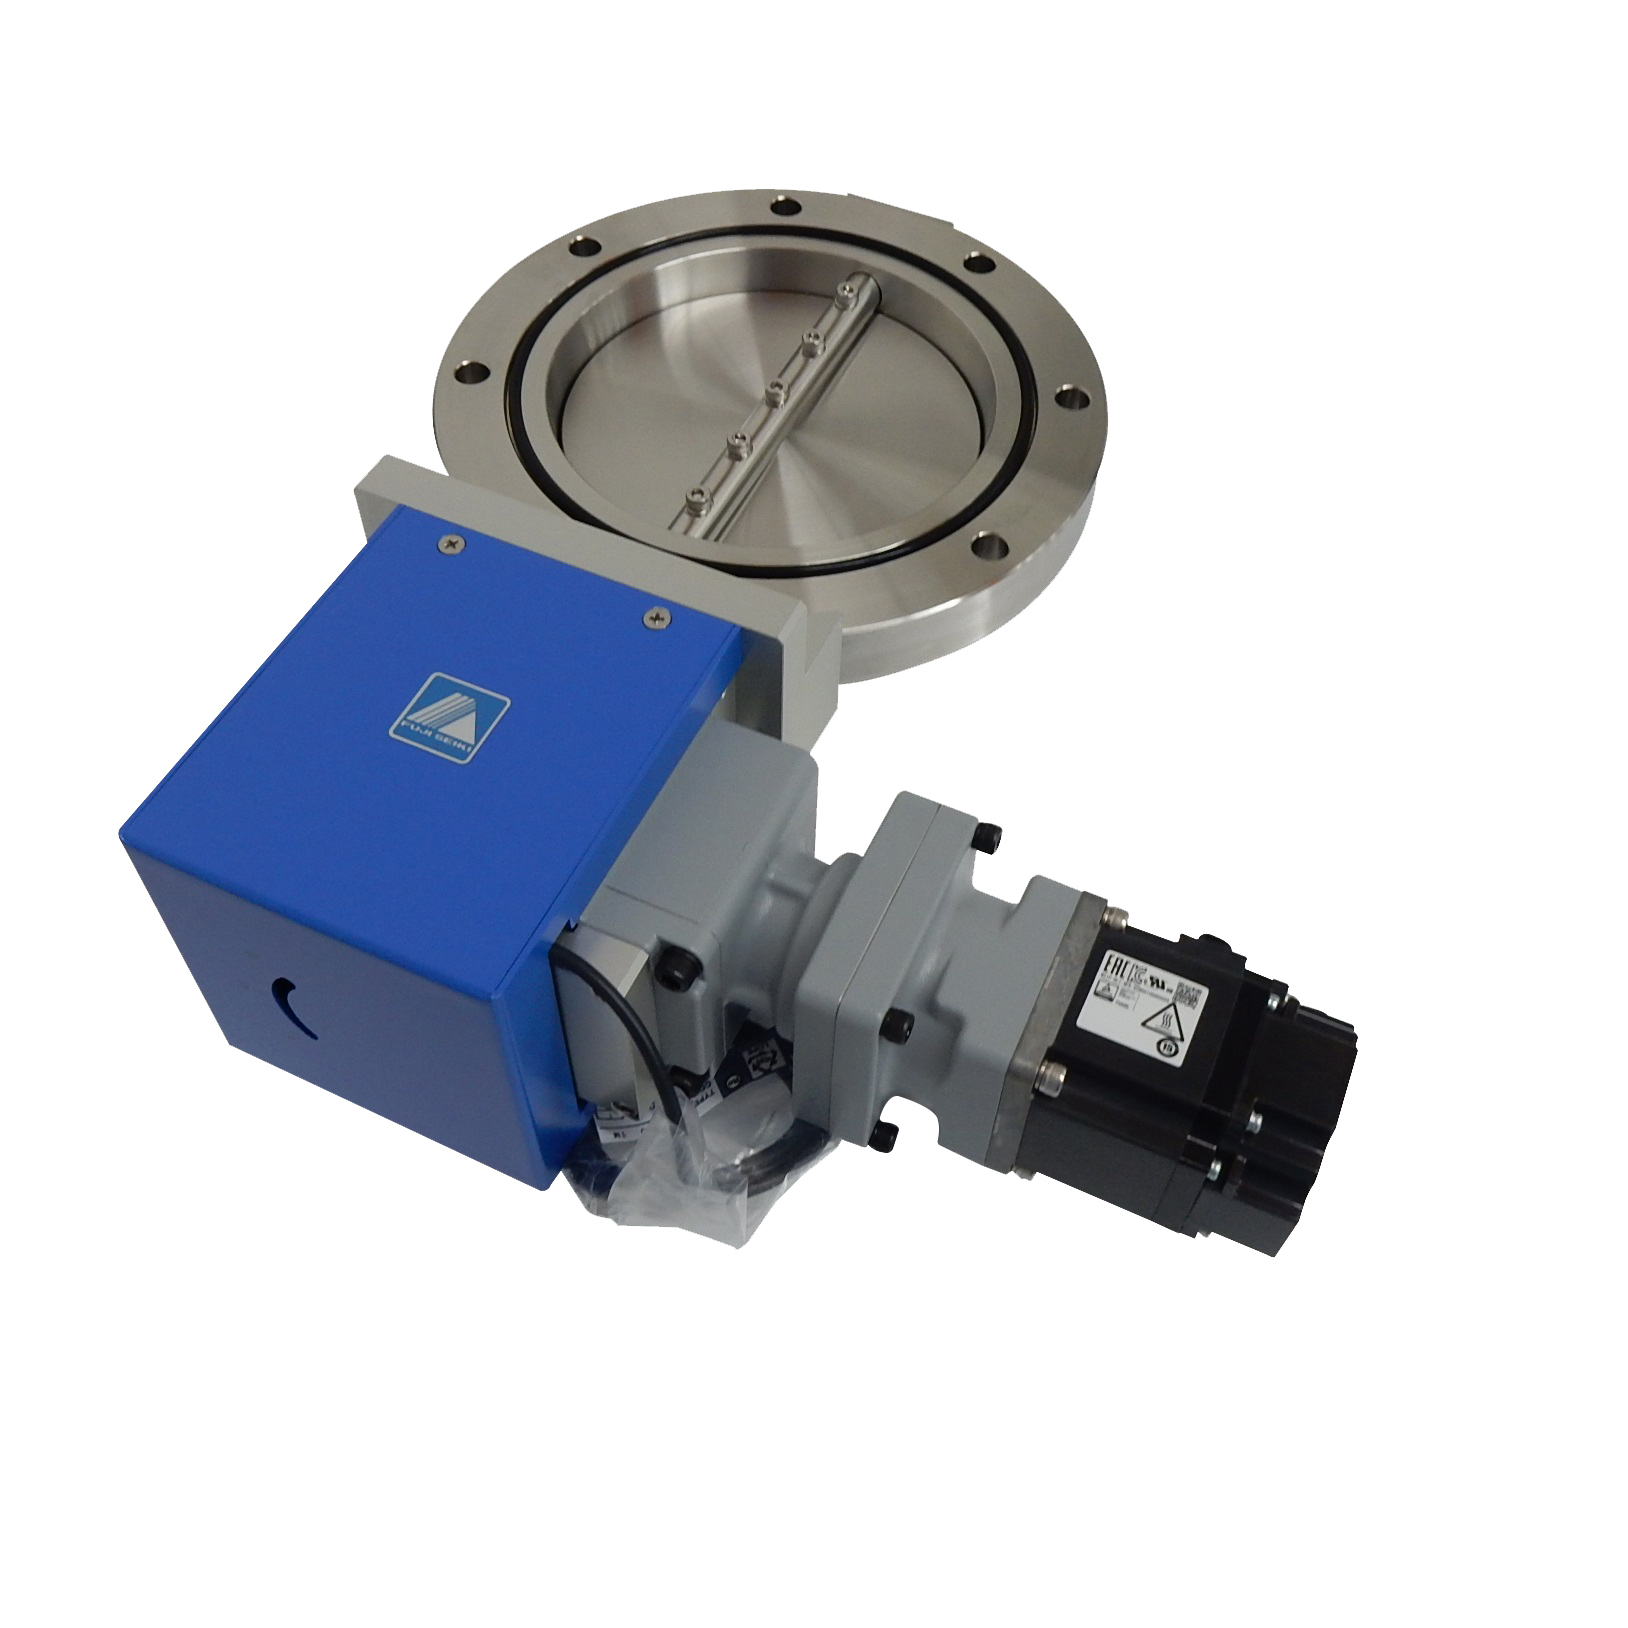 Motor-Driven Butterfly Valve MBV-LDⅡ-MP Series (MBV-NW100LDII-MP-L) 